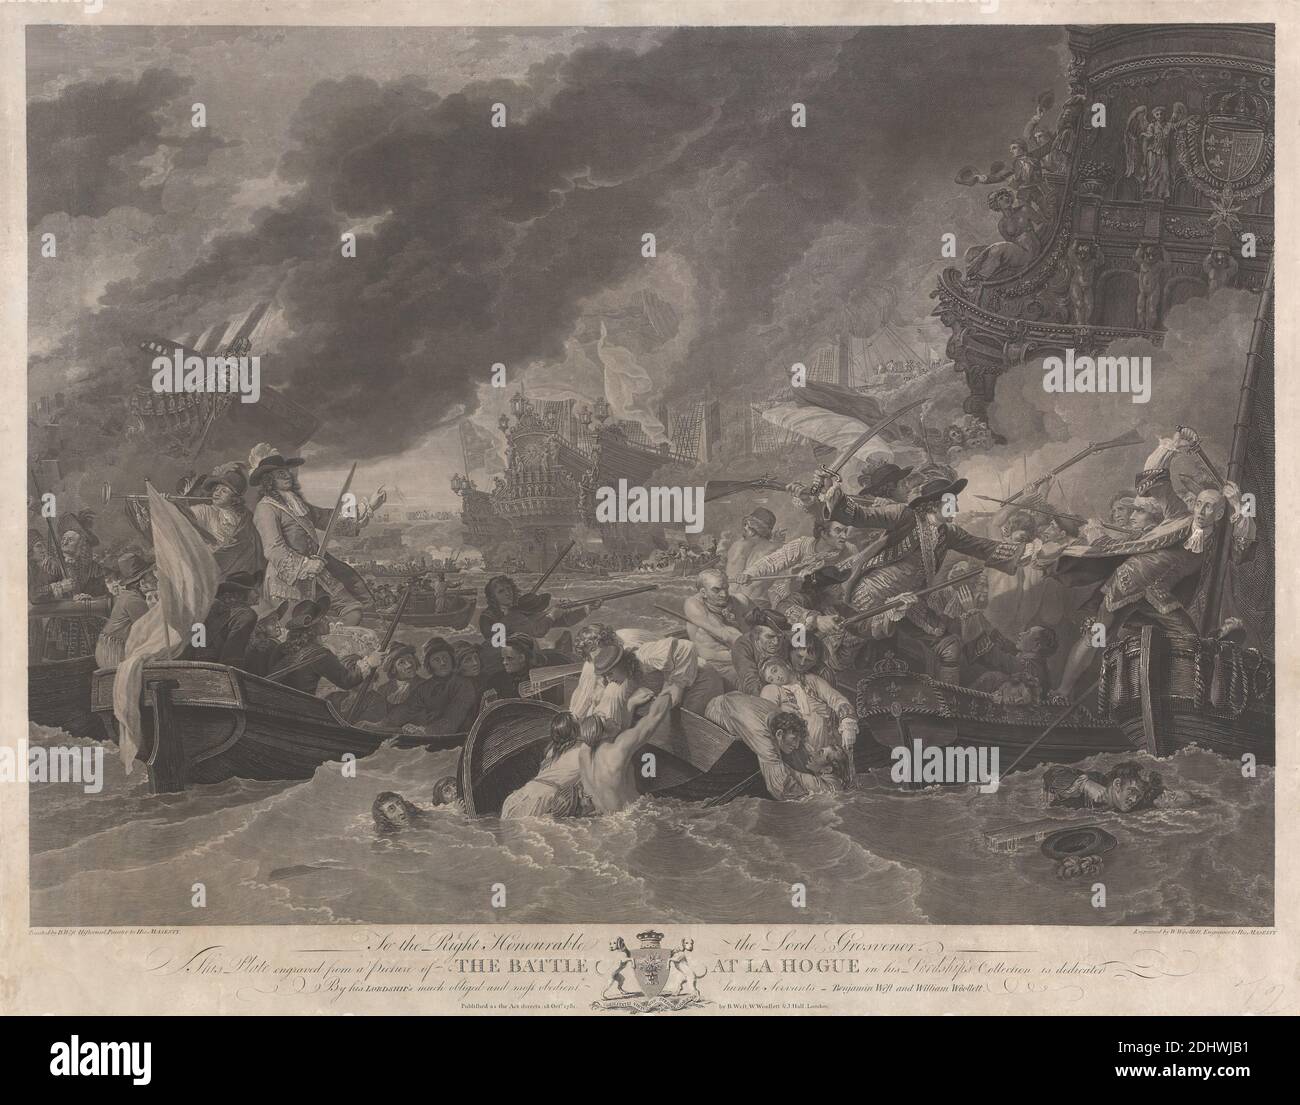 The Battle at La Hogue, William Woollett, 1735–1785, British, after Benjamin West, 1738–1820, American, active in Britain (from 1763), 1781, Etching and engraving on moderately thick, moderately textured, beige, laid paper, Sheet: 19 3/4 × 25 1/16 inches (50.2 × 63.7 cm) and Image: 16 7/8 × 23 3/8 inches (42.9 × 59.4 cm), battle, bayonets, boats, costume, death, drama, fire, flags, fleets, La Hogue, Battle of, 1692, marine art, military art, sea, ships, smoke, soldiers, swords, war Stock Photo